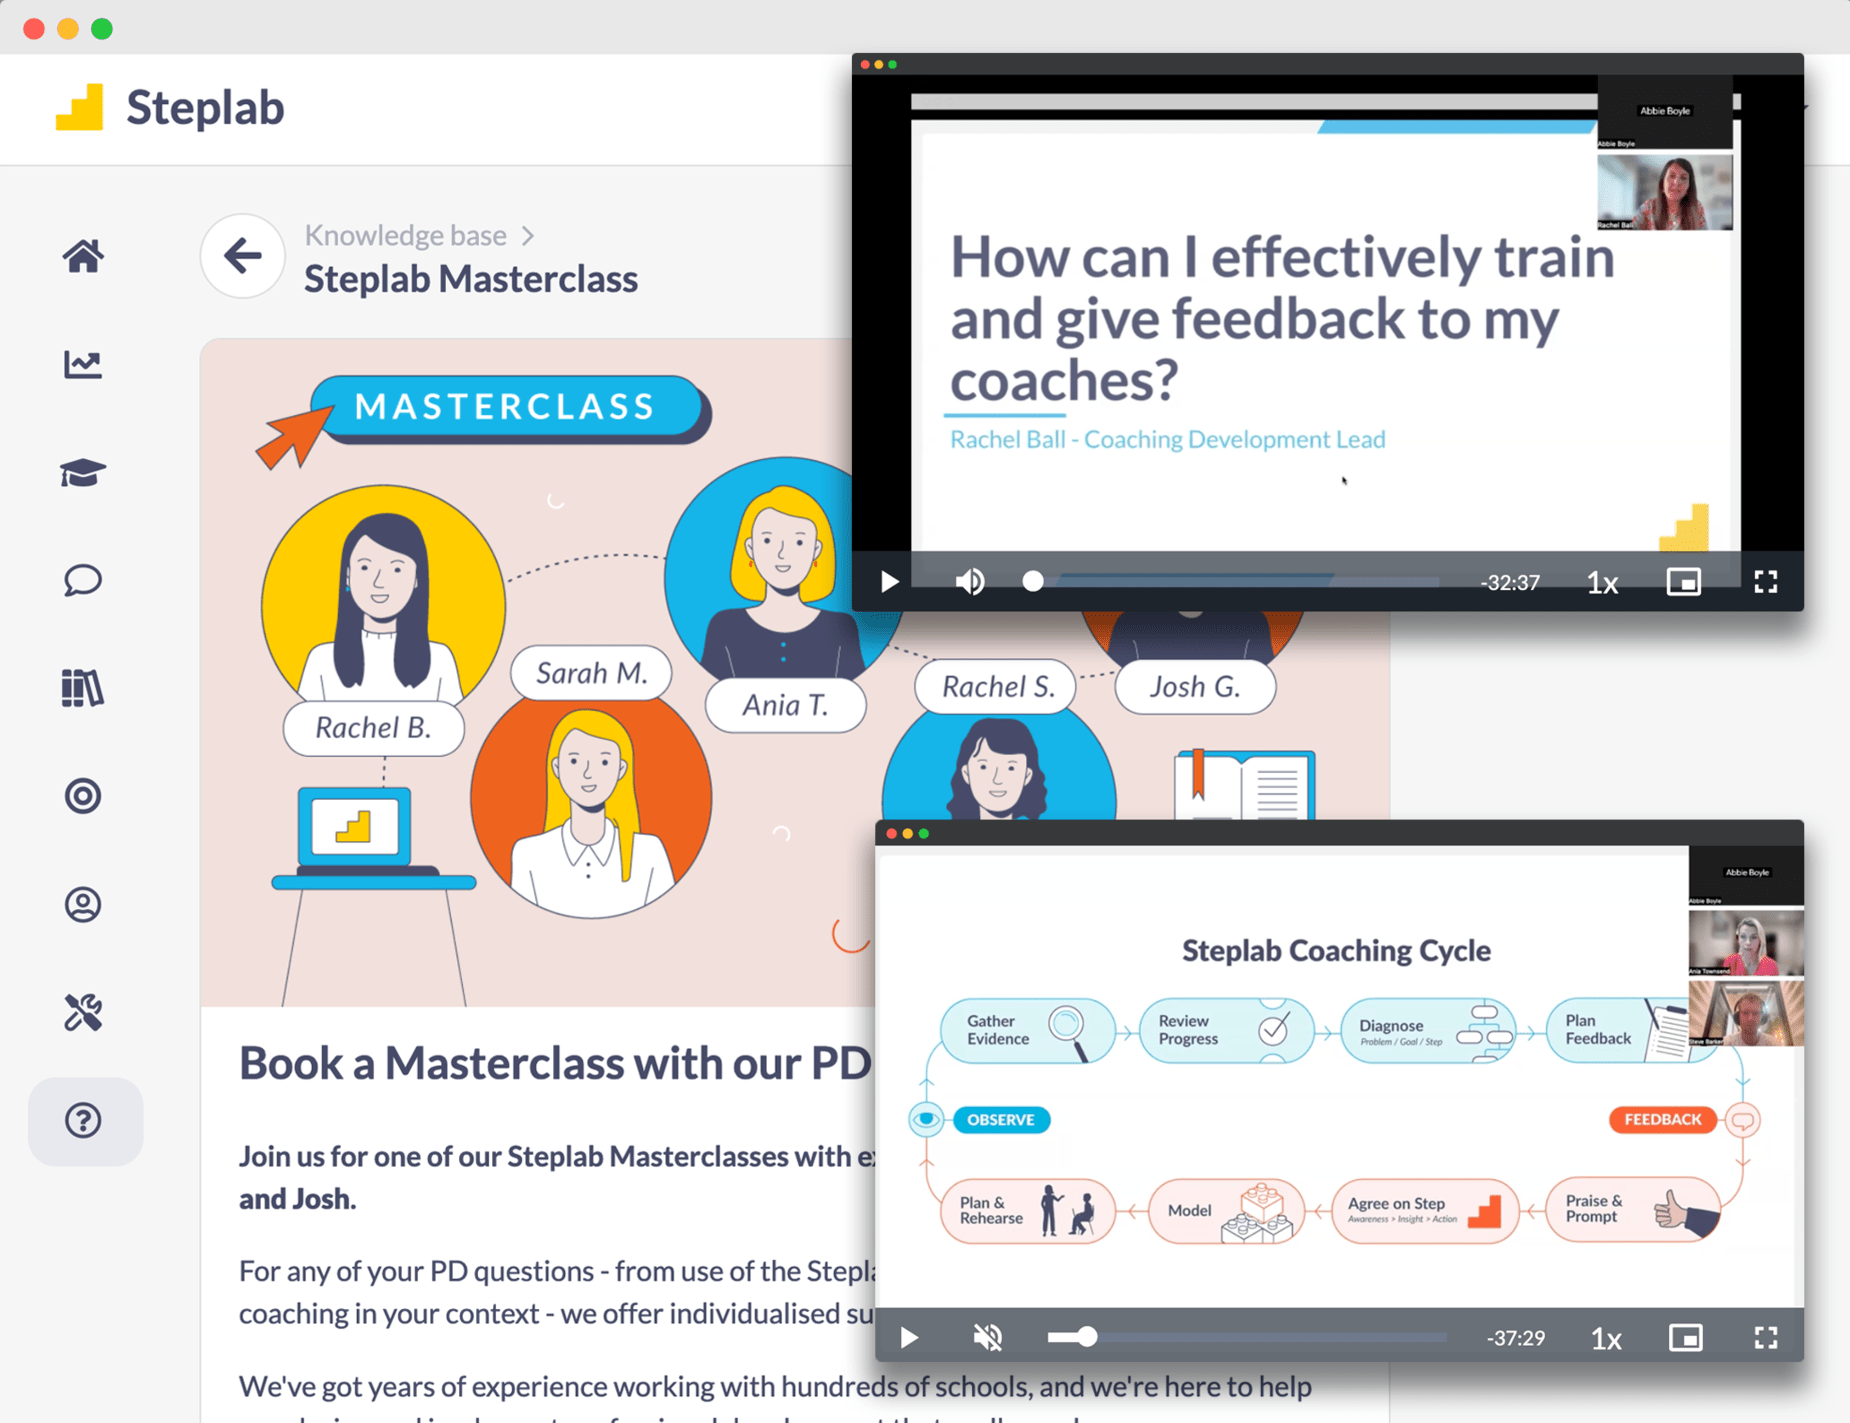 Screenshot showing how to book a PD masterclass with Steplab